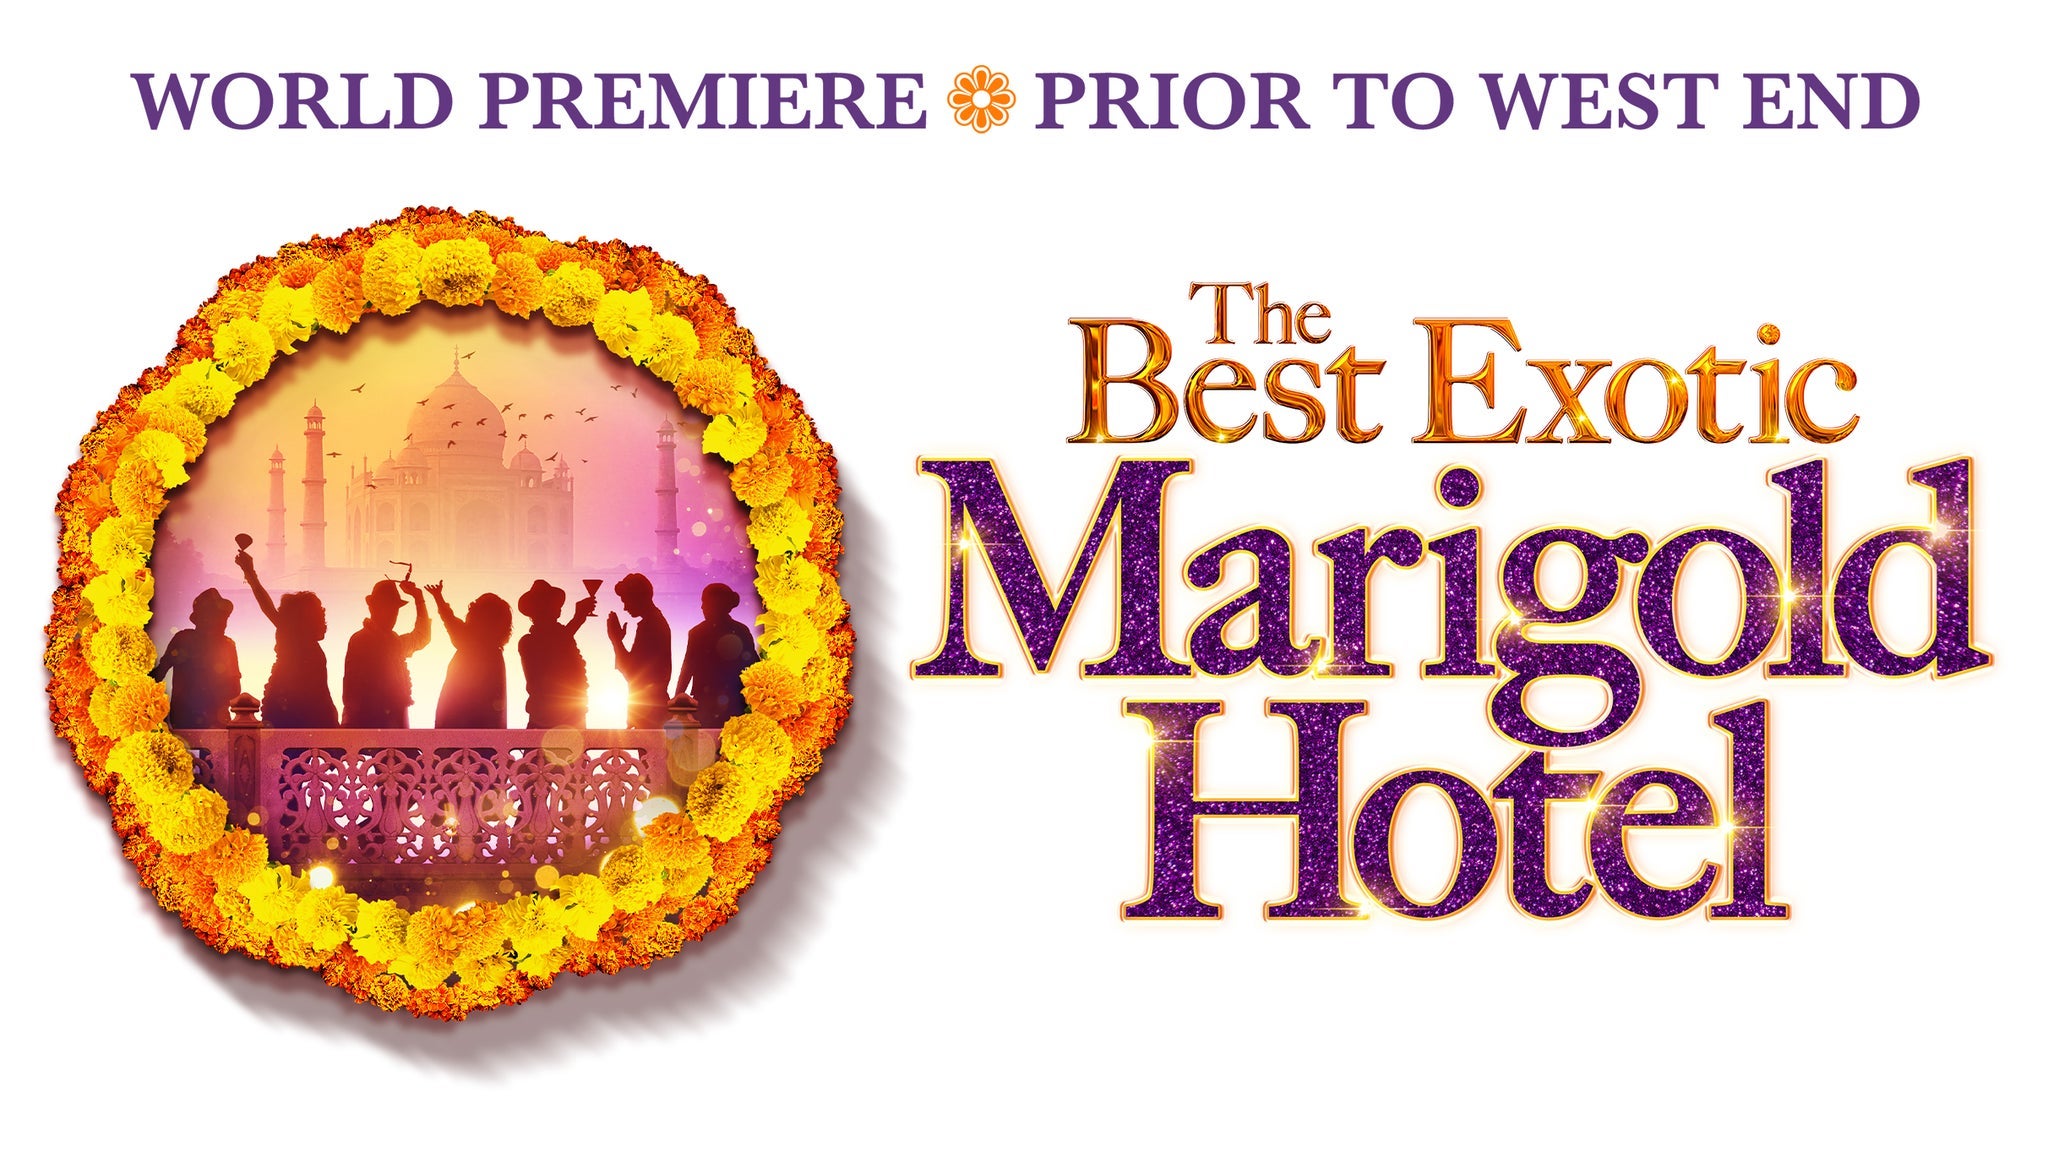 Image used with permission from Ticketmaster | The Best Exotic Marigold Hotel tickets